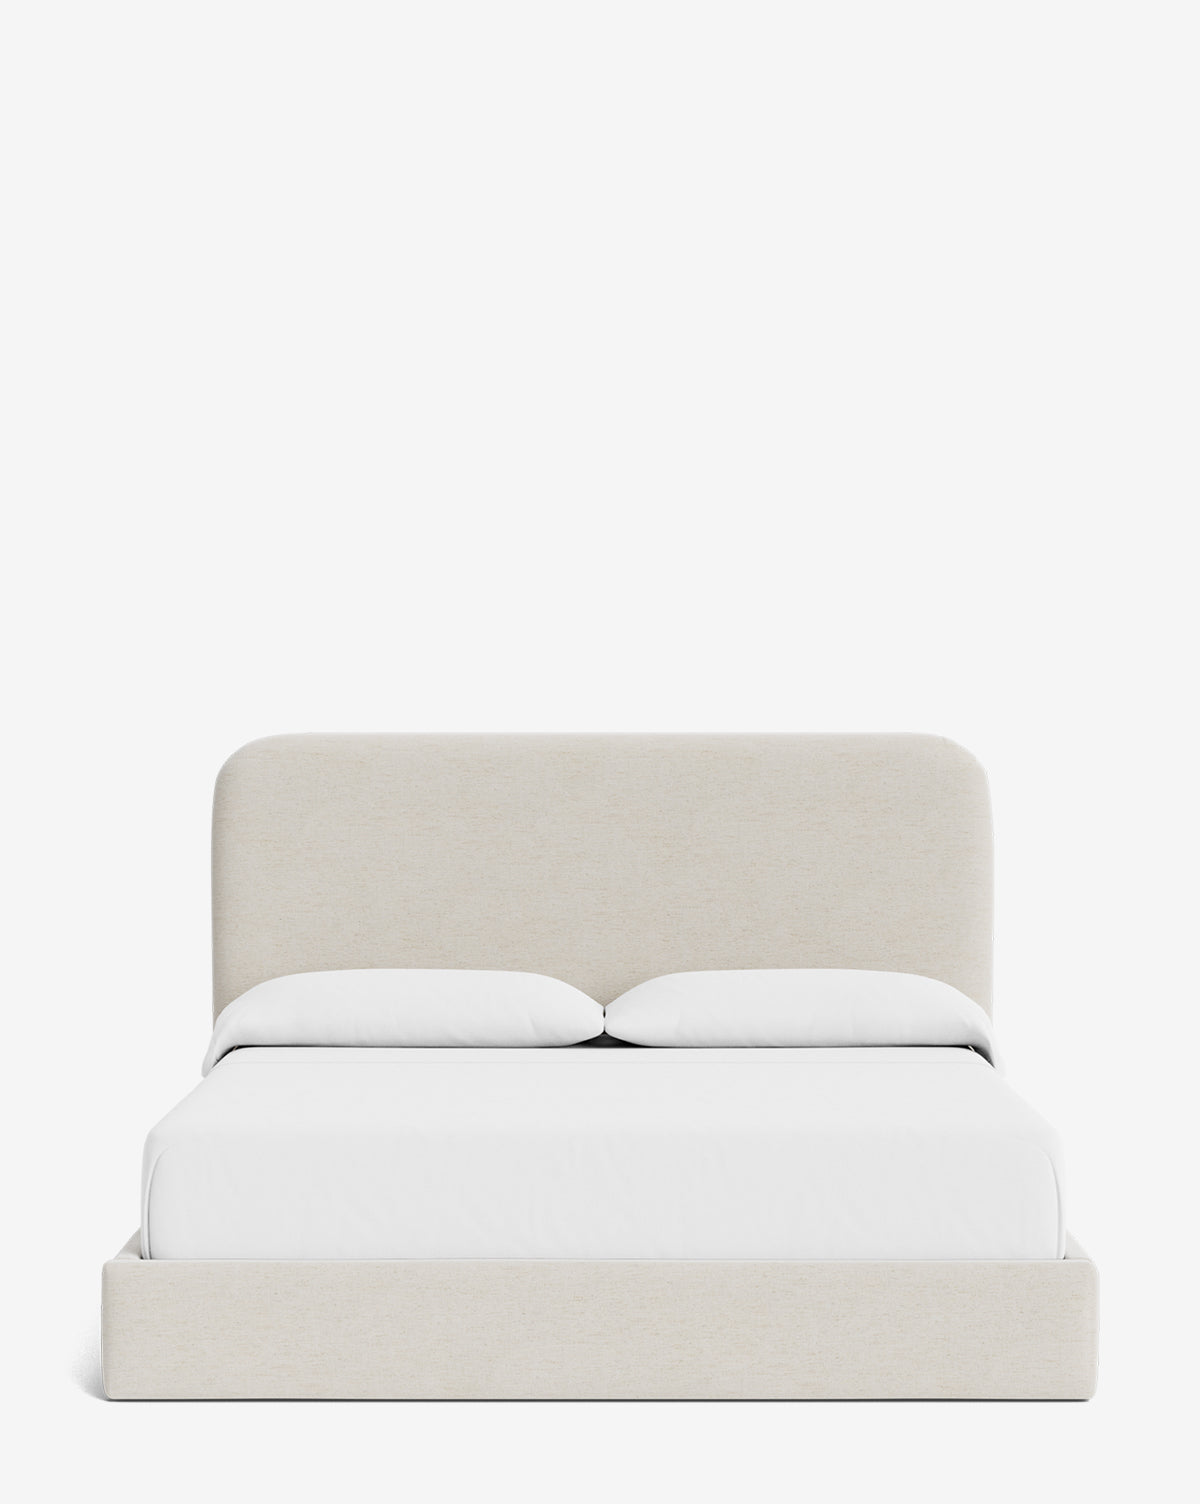 Northcott Bed – McGee & Co.